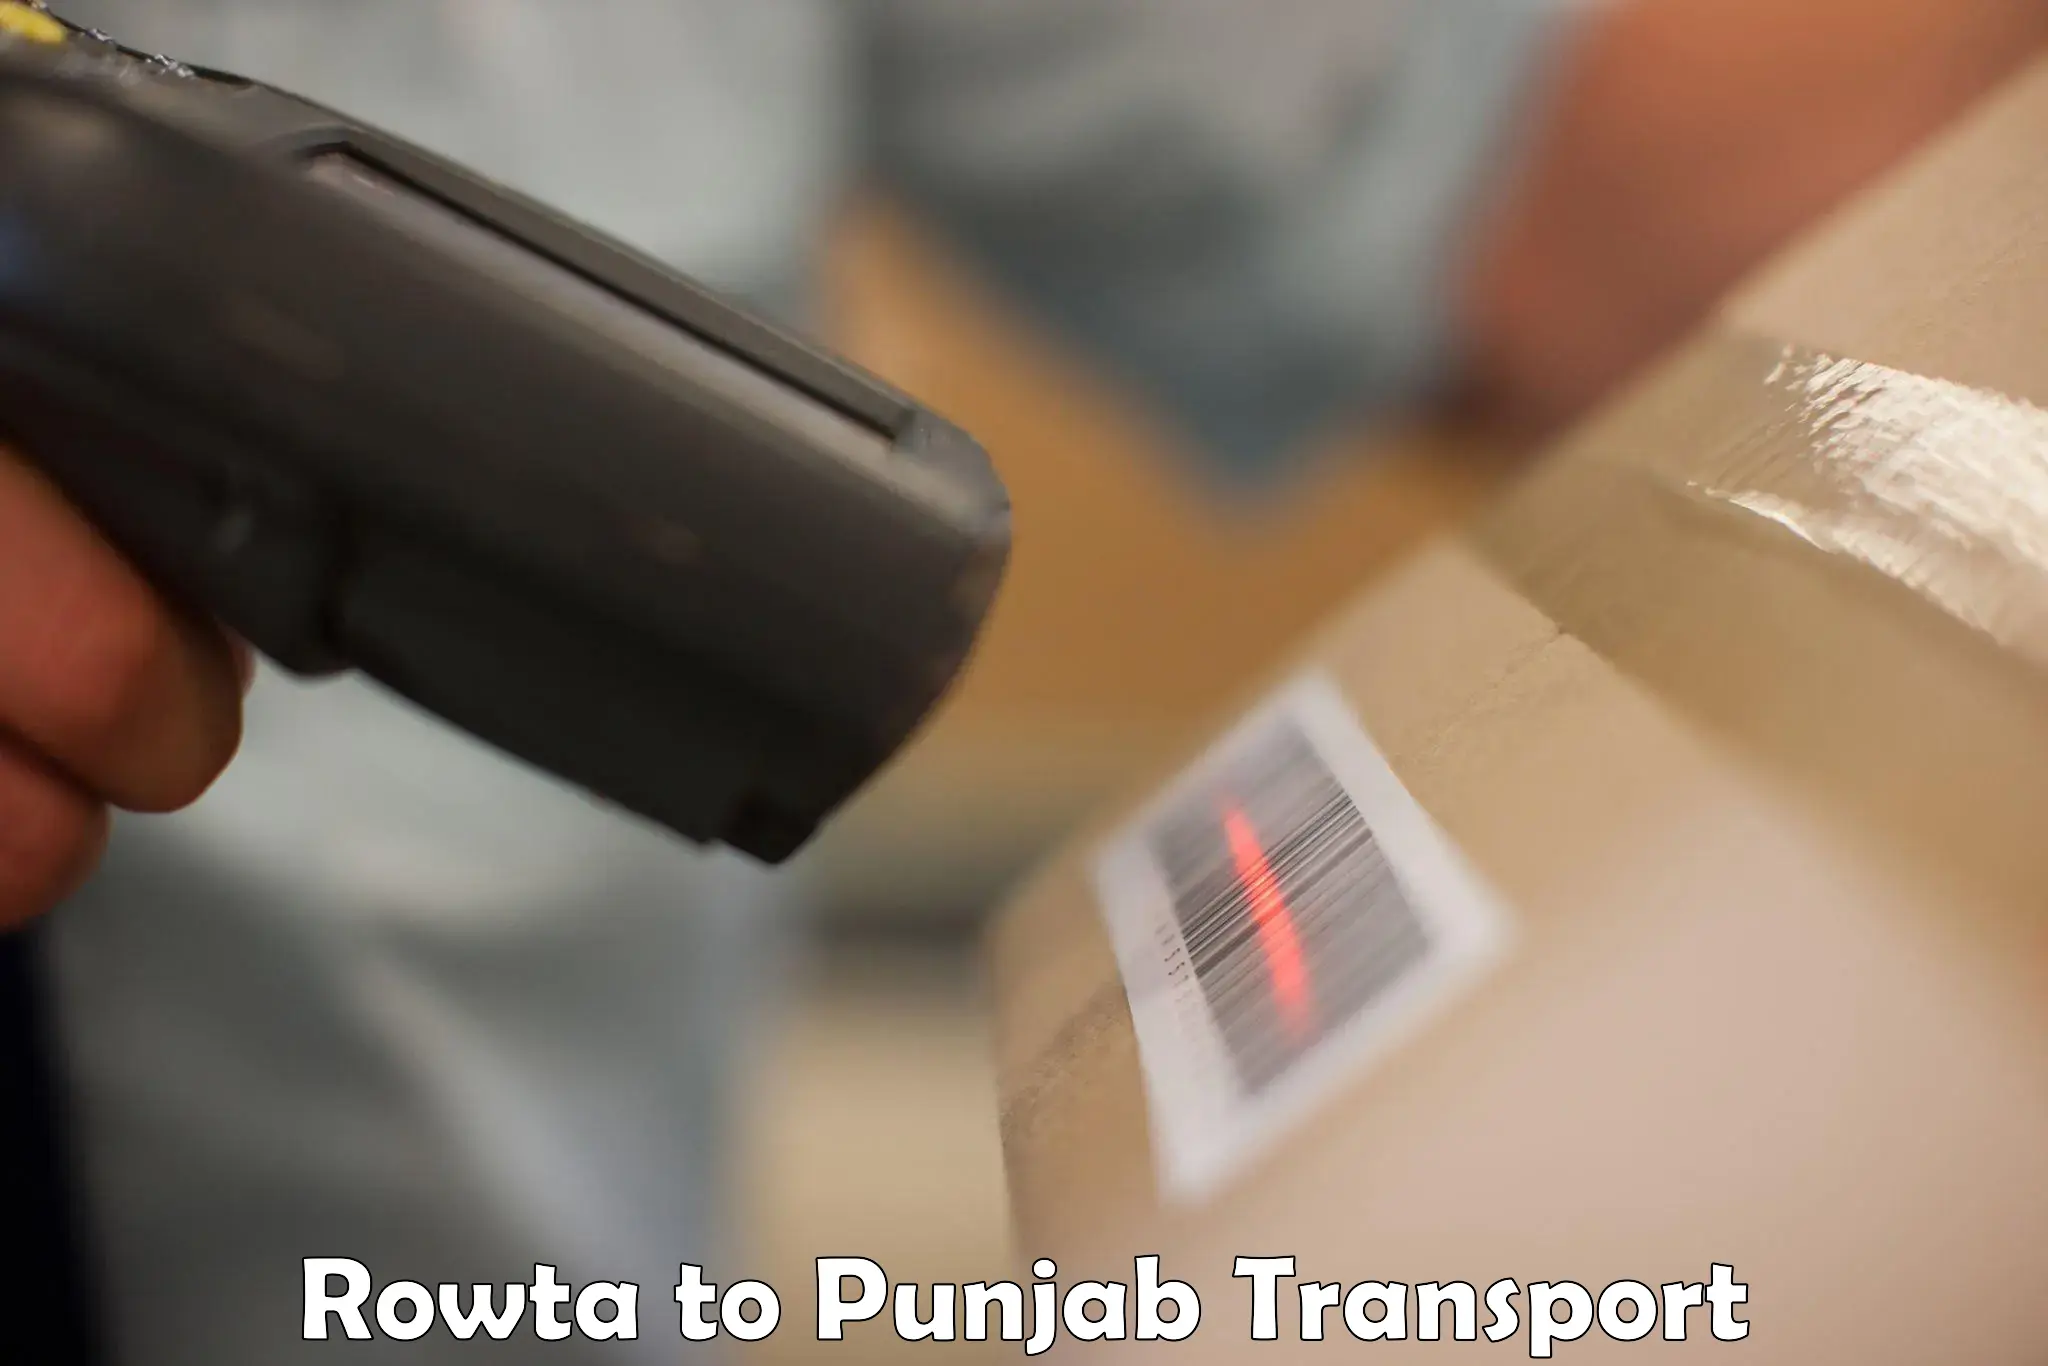 Domestic transport services Rowta to Sultanpur Lodhi